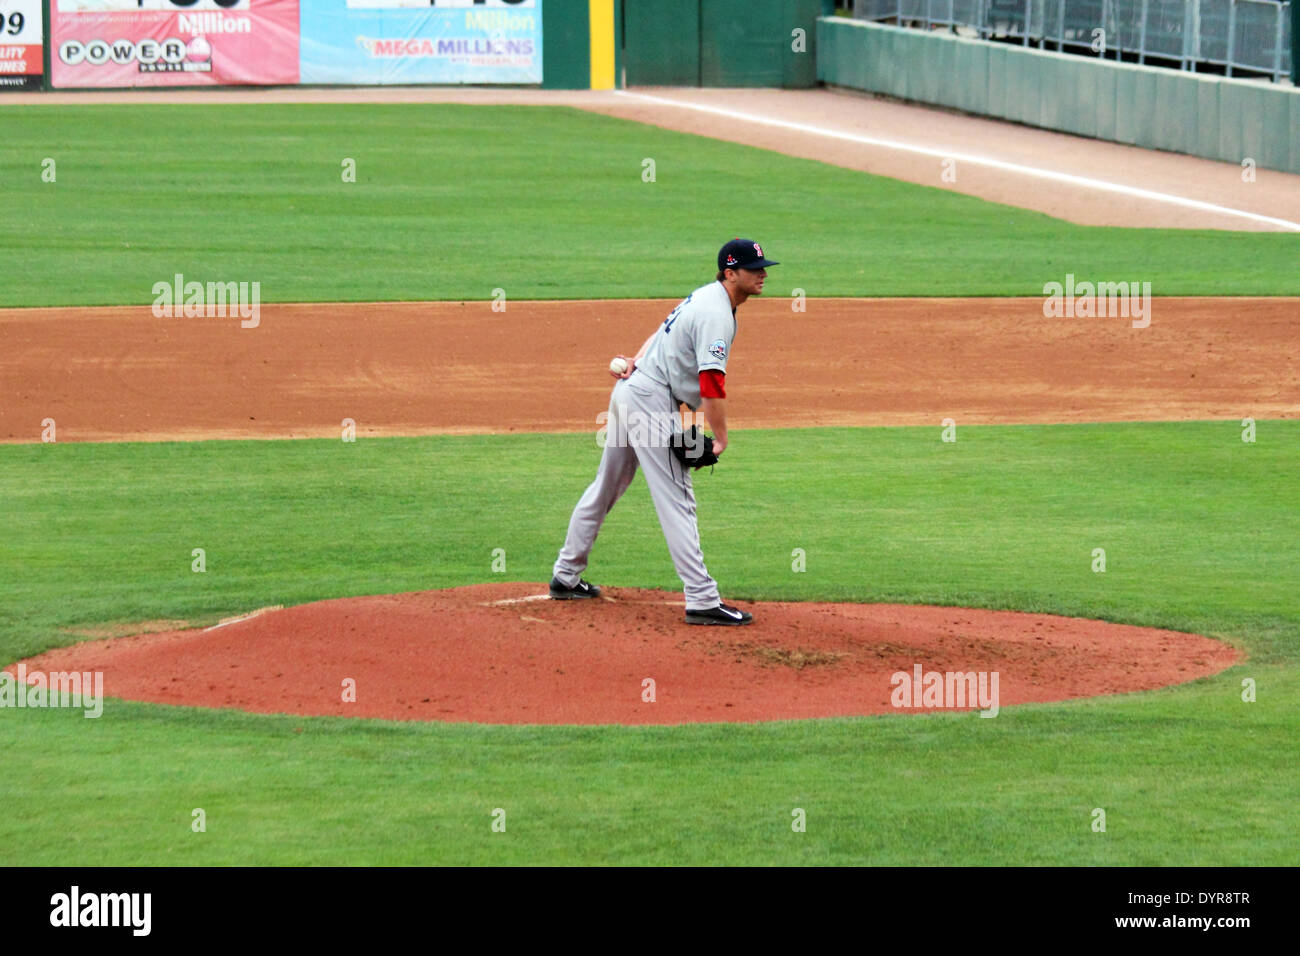 A baseball pitcher readies himself on the mound and looks for a sign from the catcher. Stock Photo